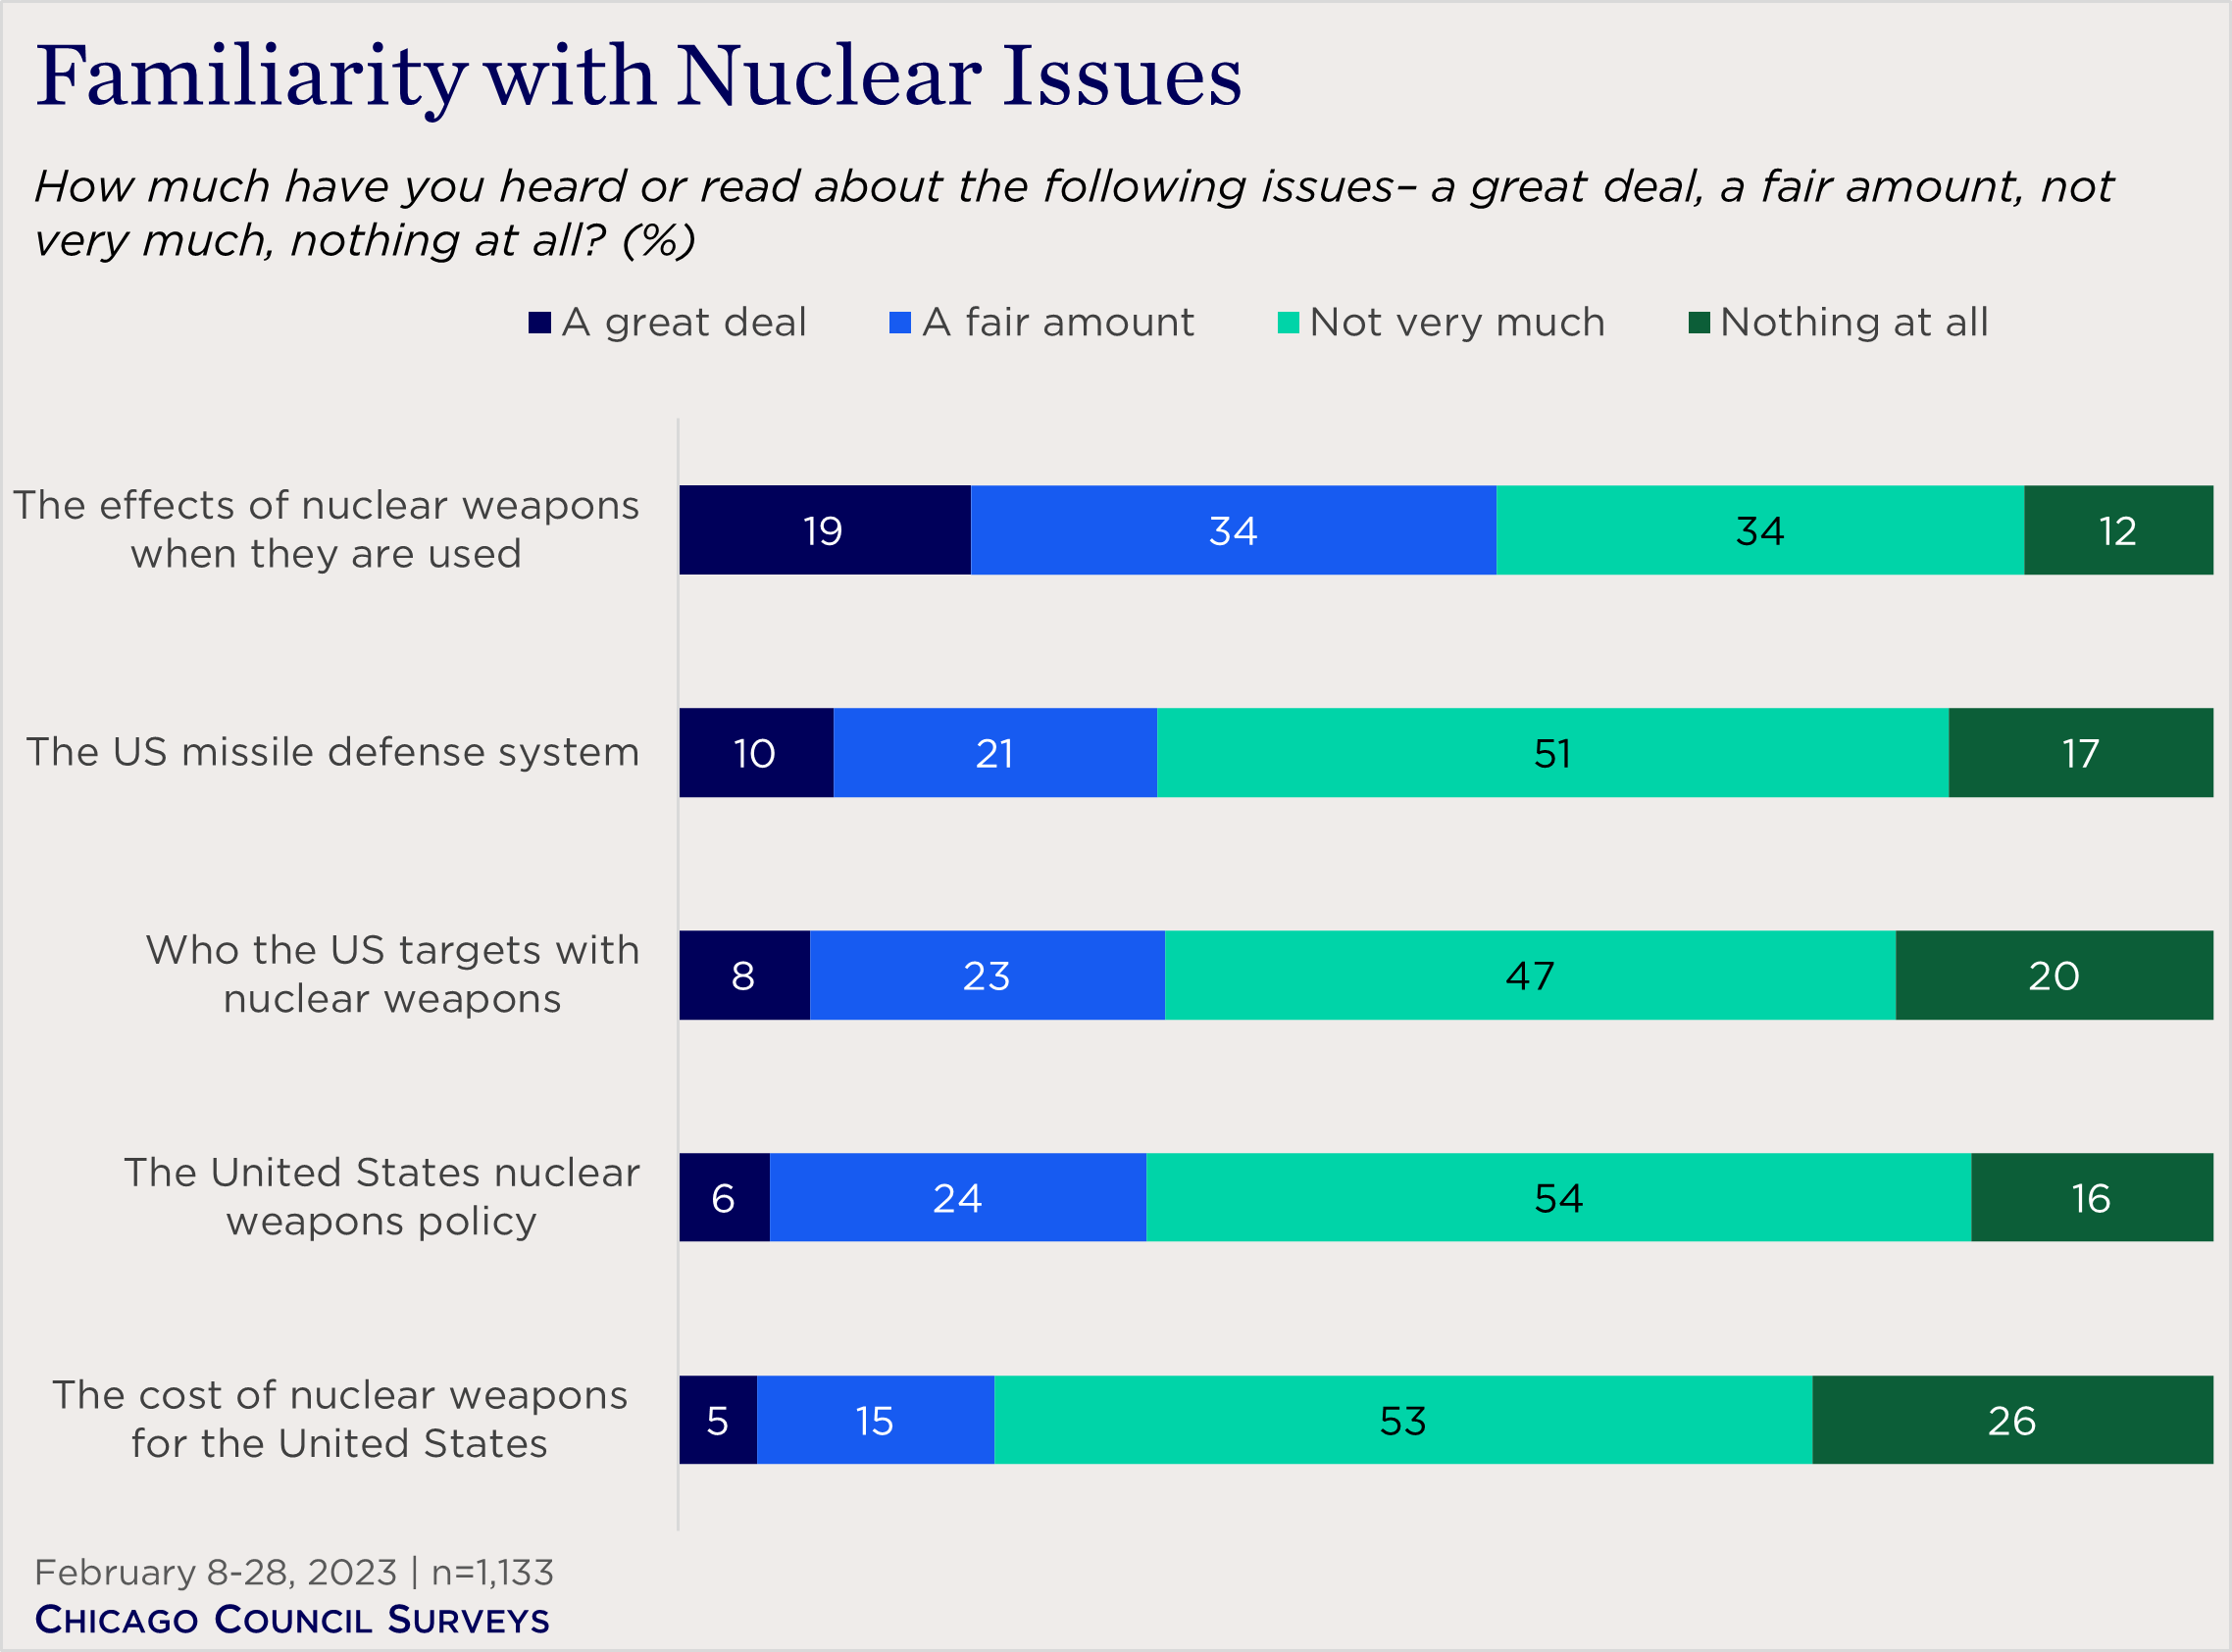 bar chart showing familiarity with nuclear issues